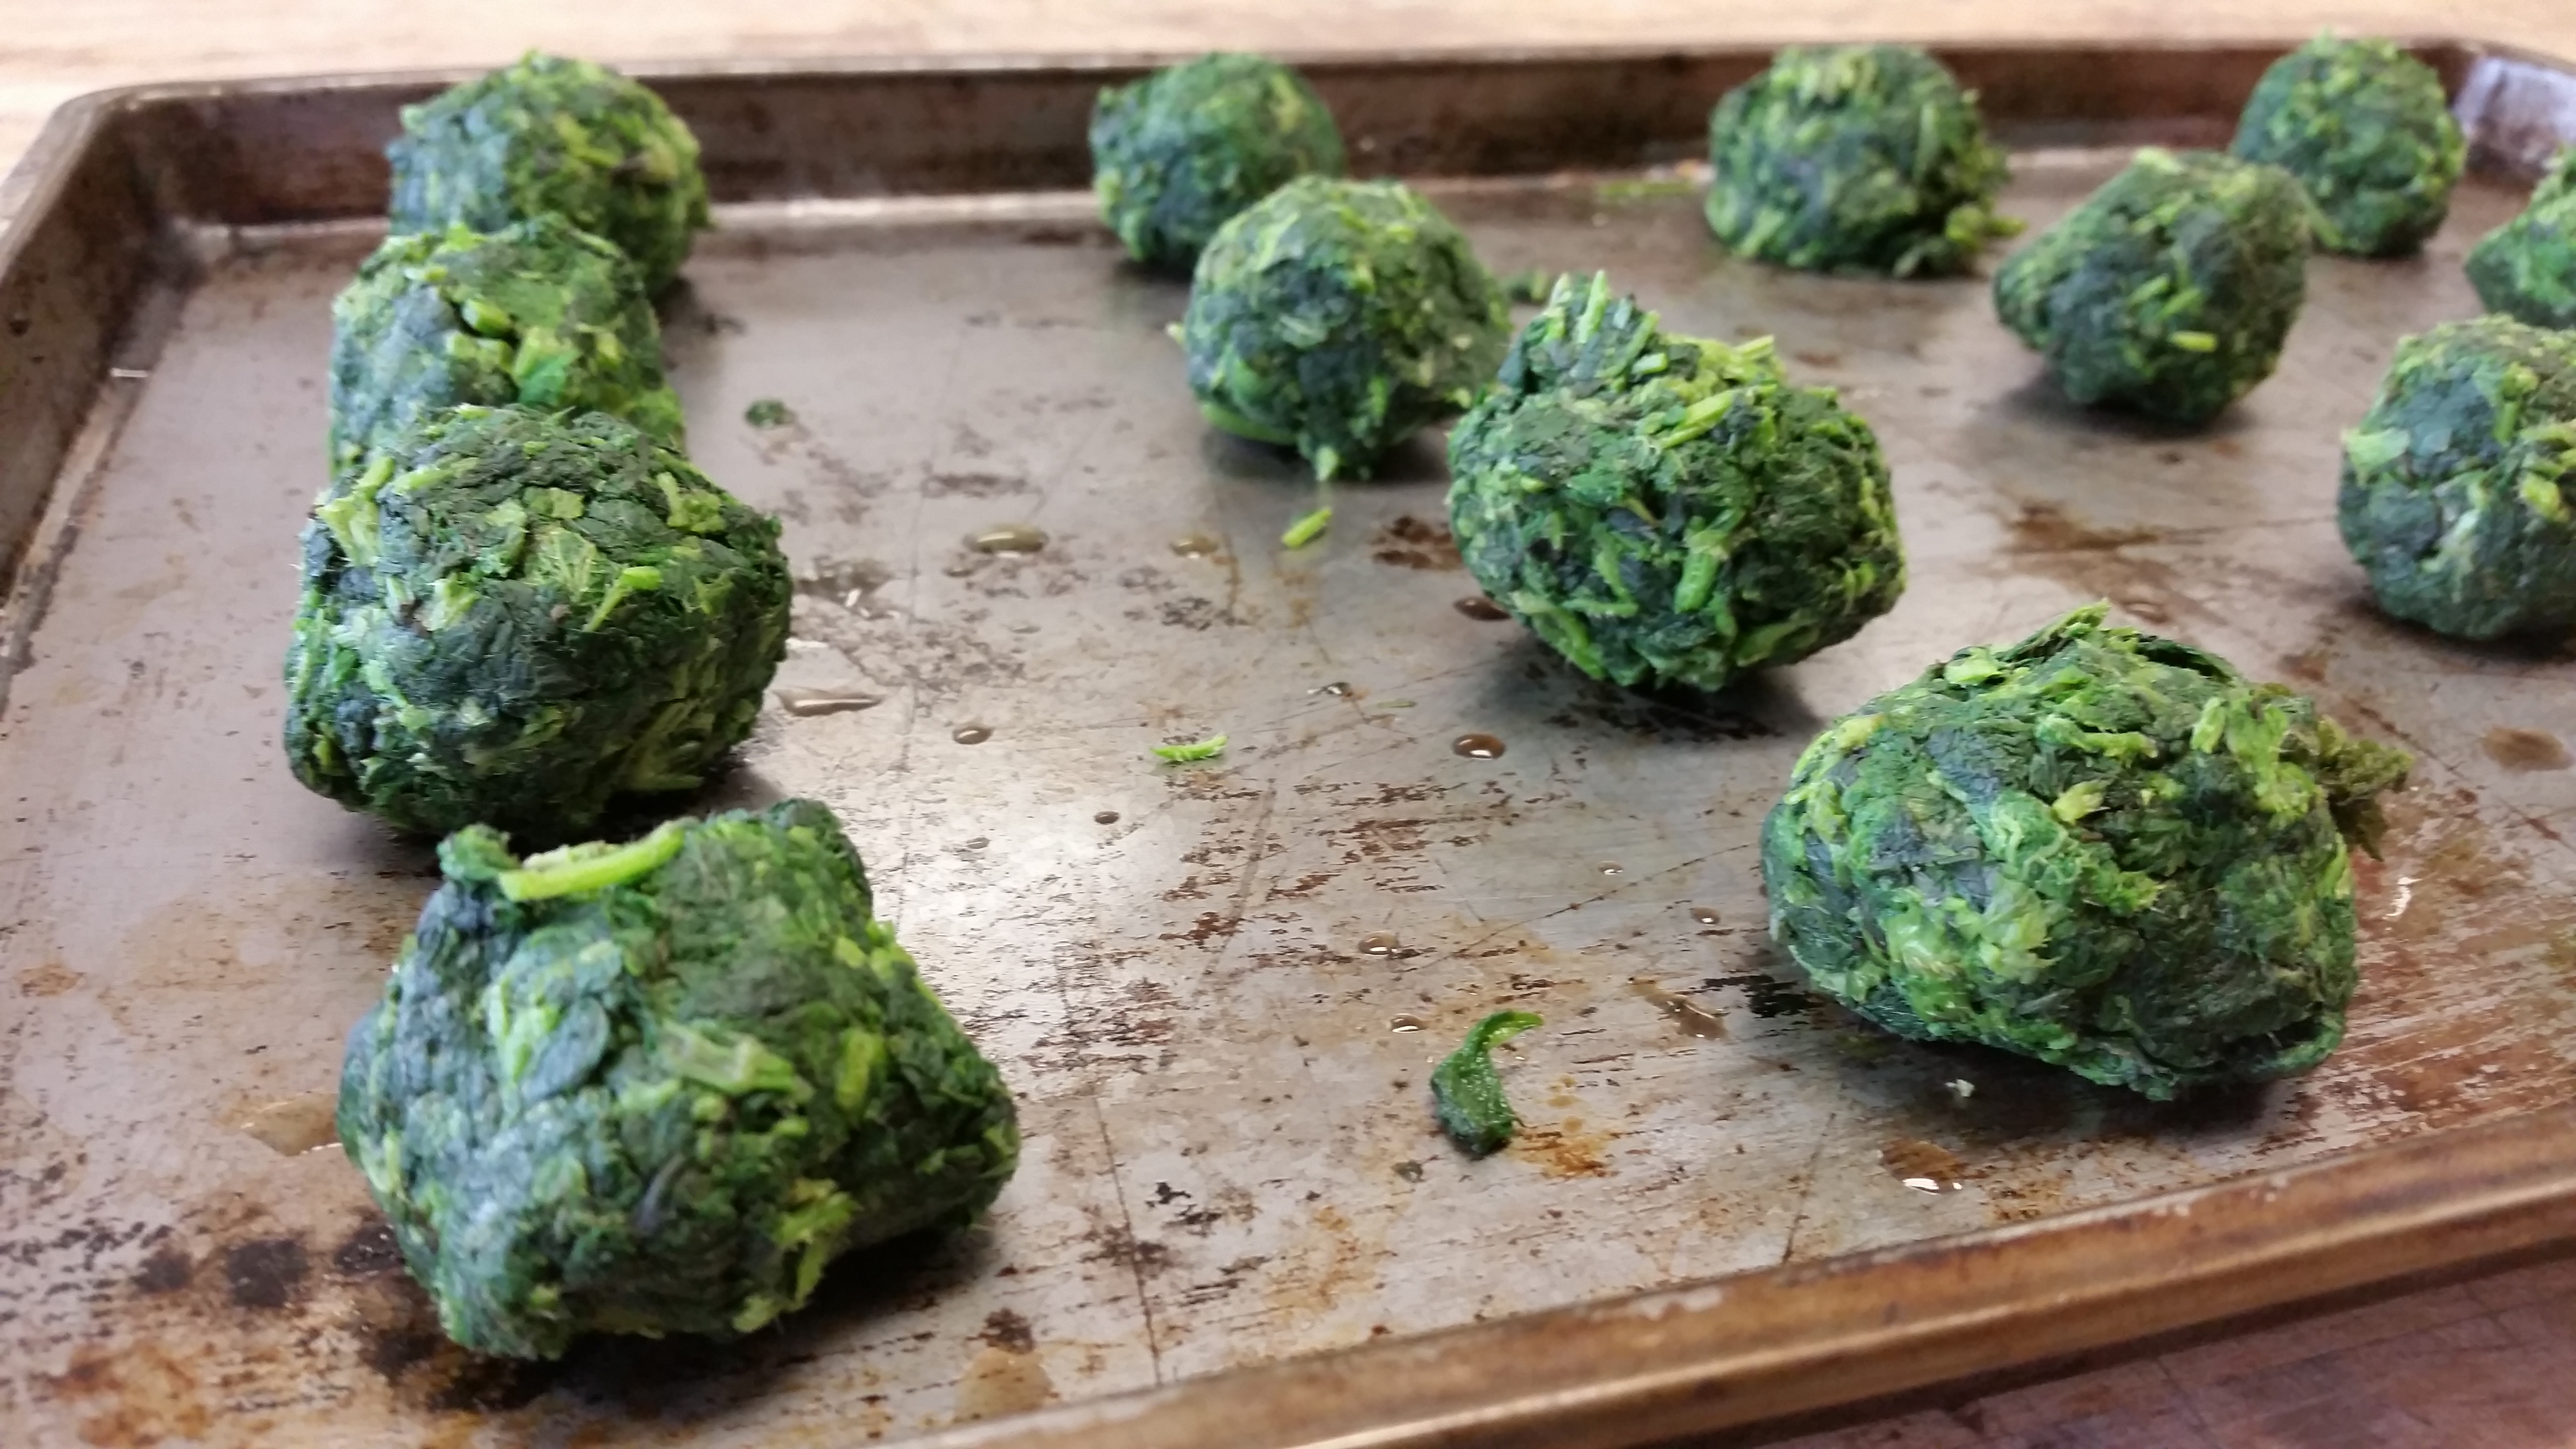 A batch of "nettle balls" before they went into the freezer.